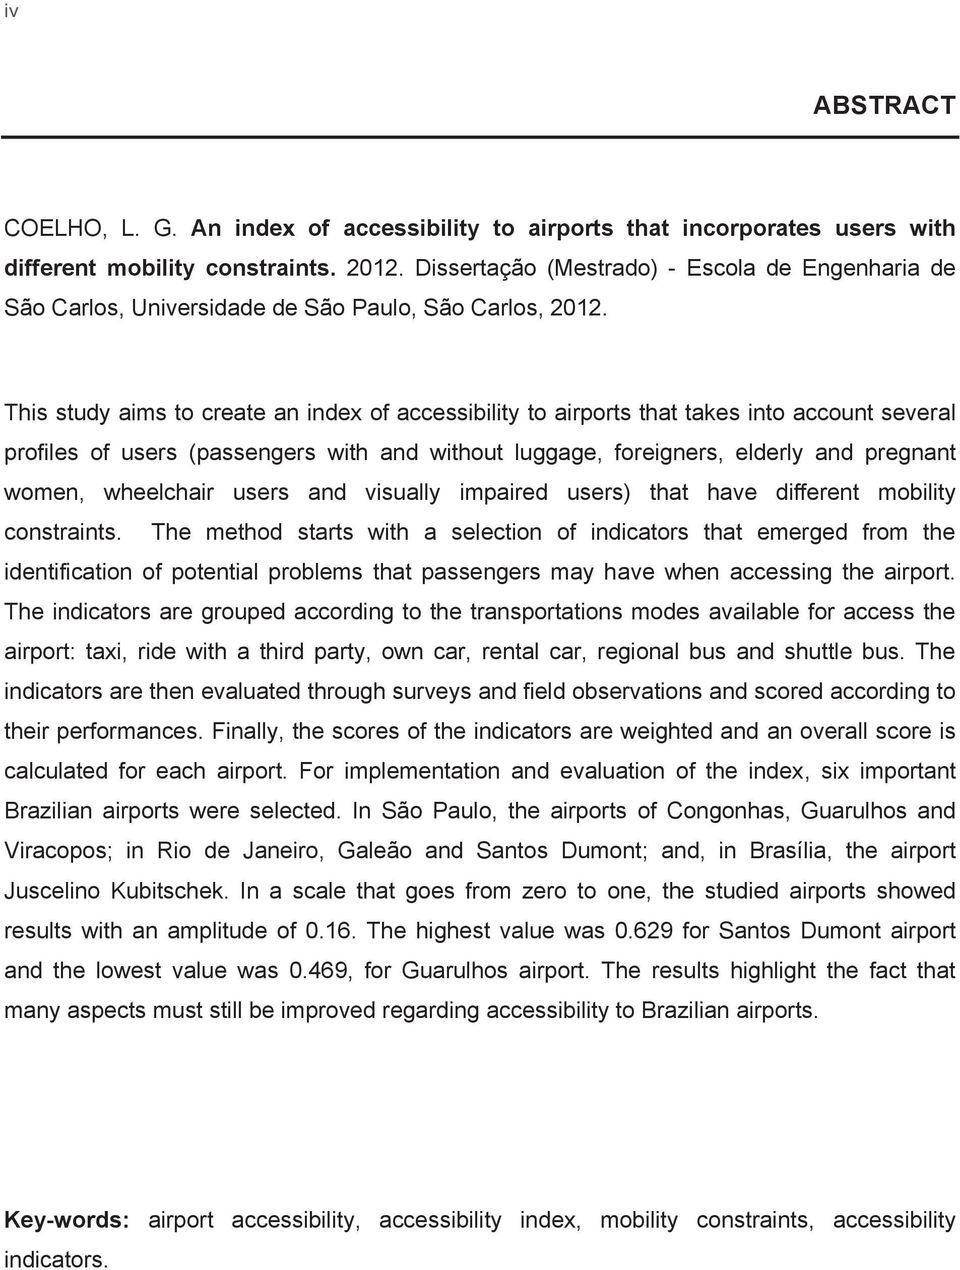 This study aims to create an index of accessibility to airports that takes into account several profiles of users (passengers with and without luggage, foreigners, elderly and pregnant women,